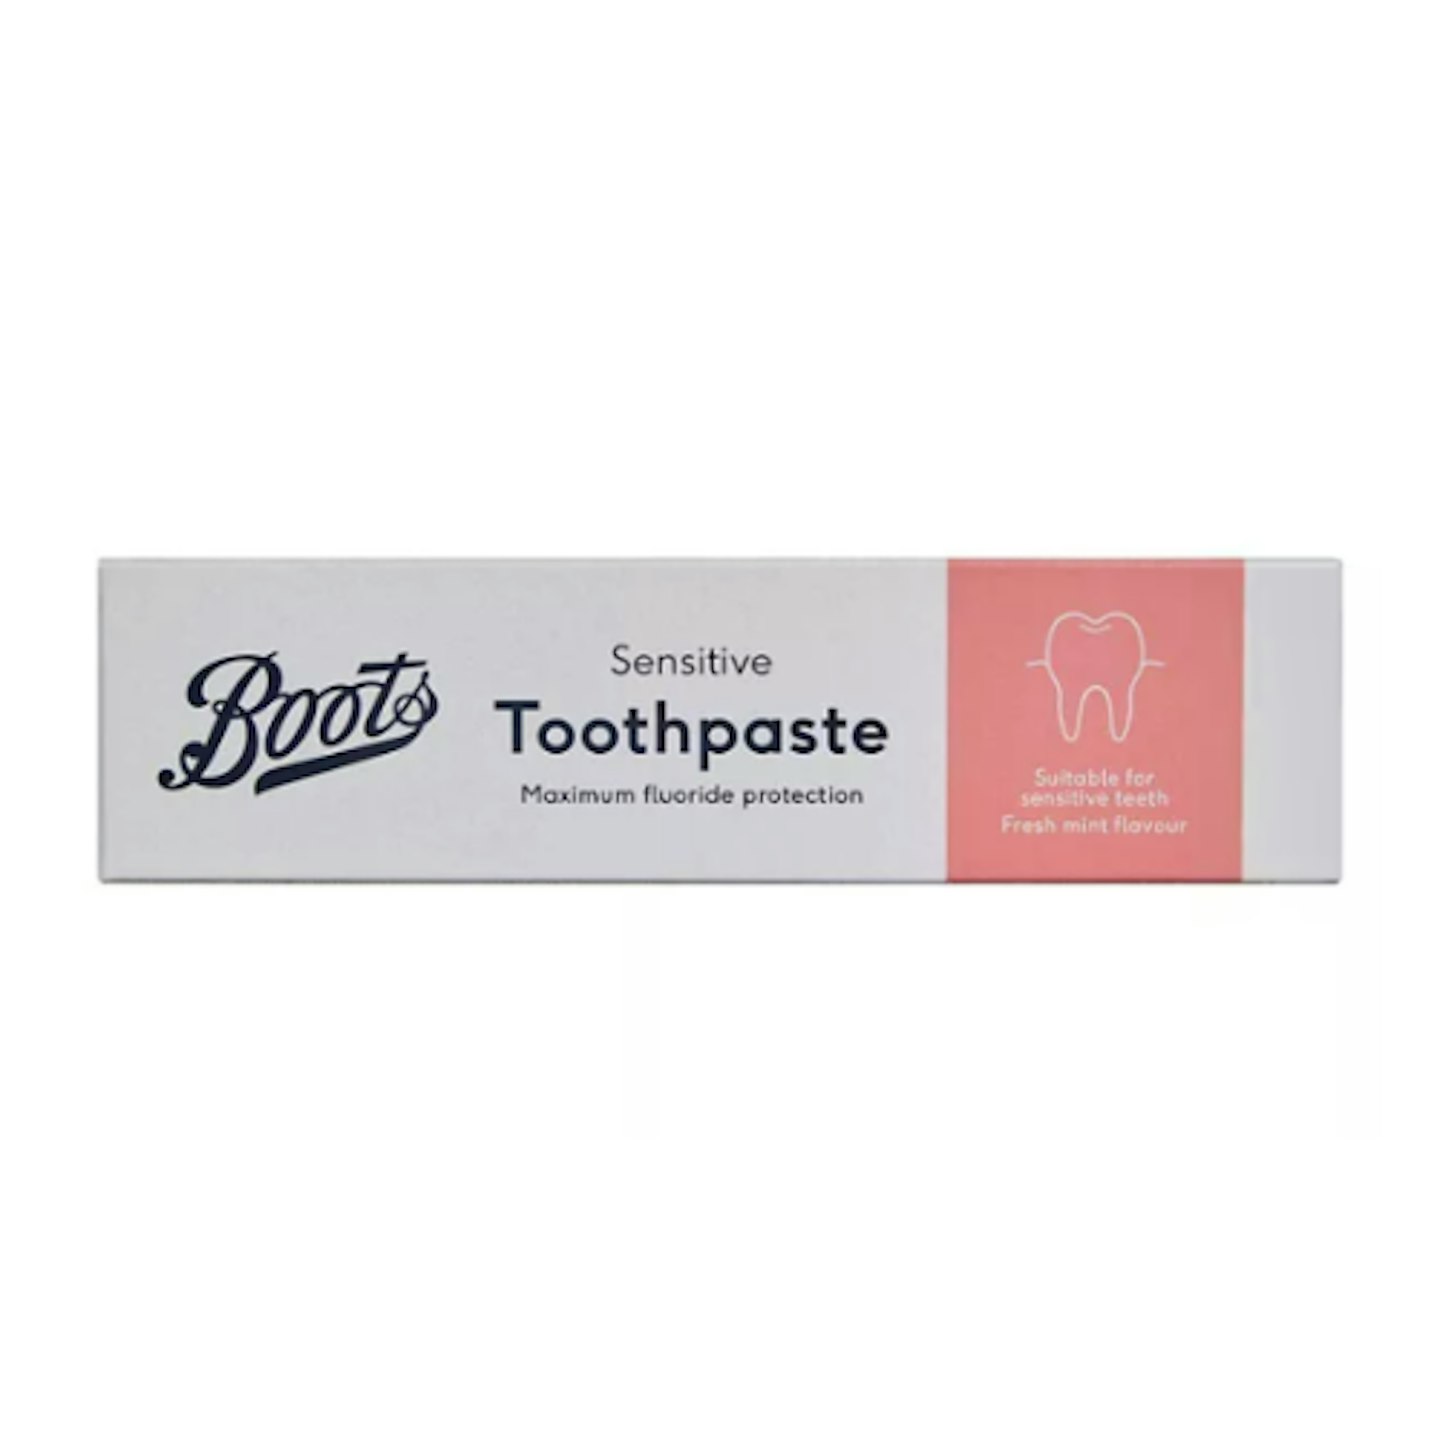 Boots everyday Sensitive Toothpaste 100ml